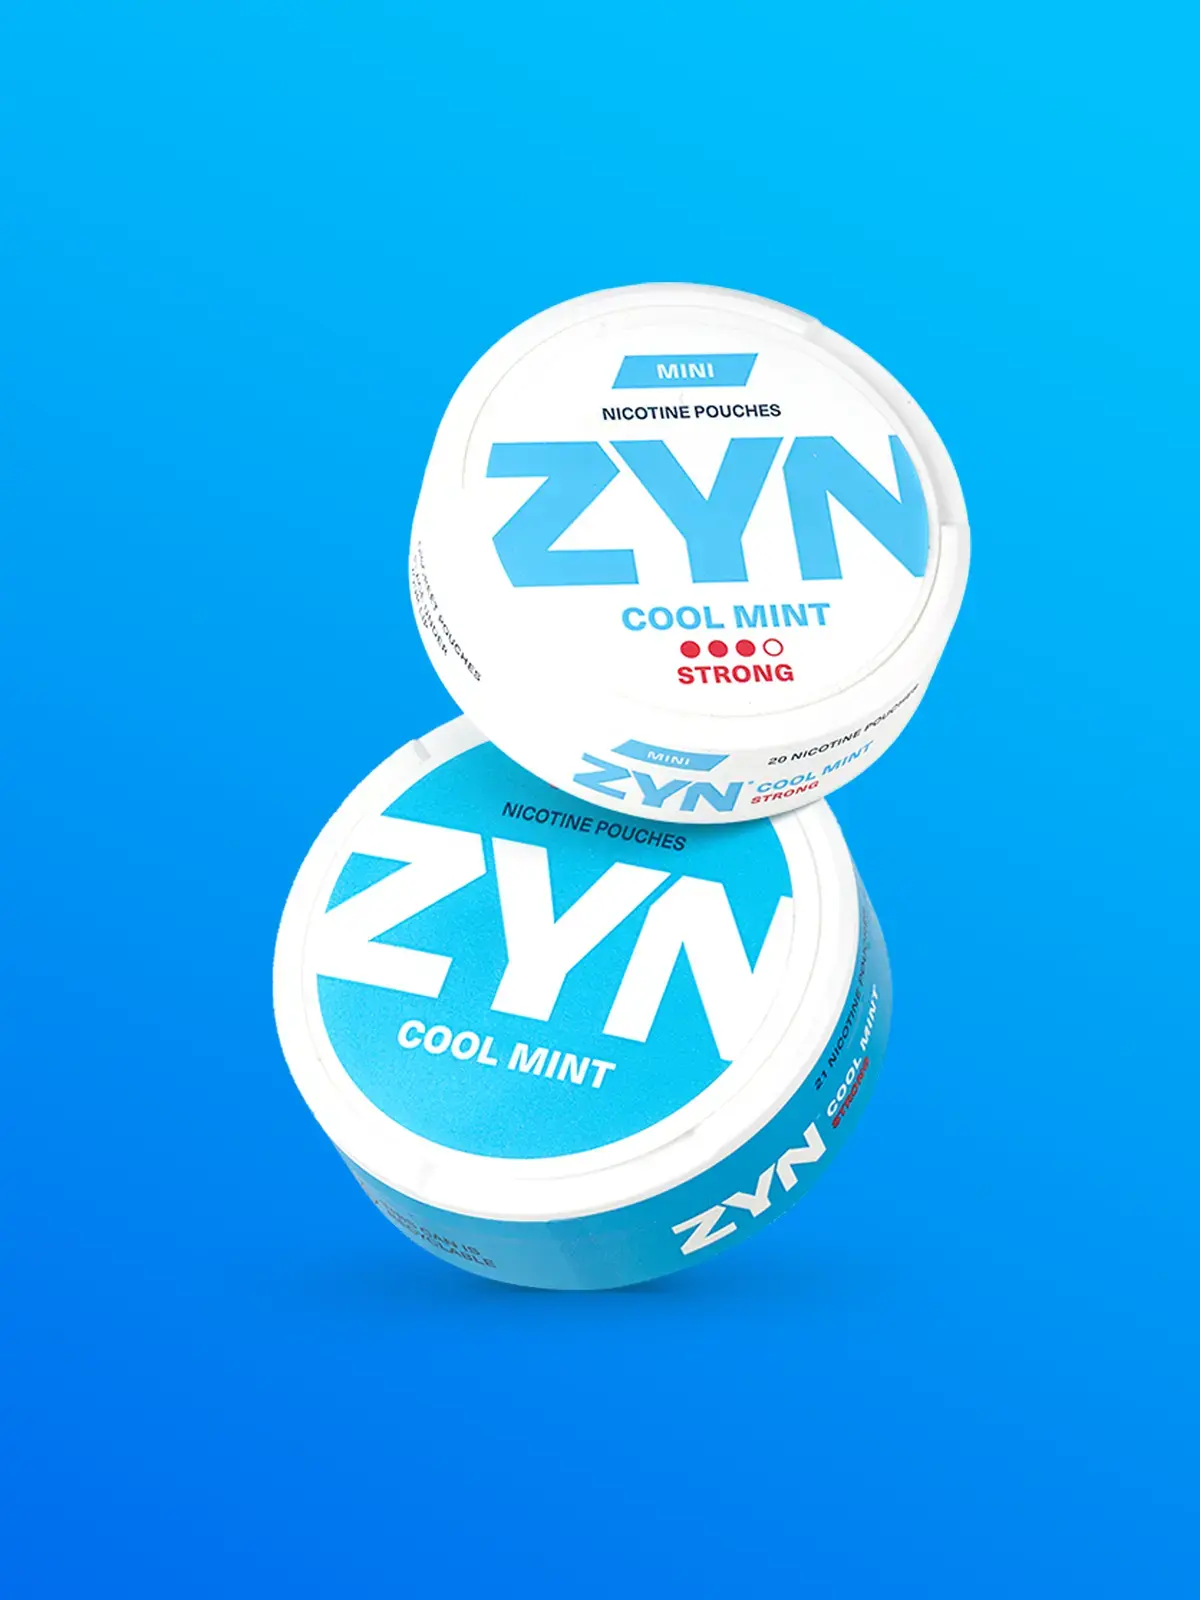 Two tins of Zyn nicotine pouches; Zyn Mini in Cool Mint flavour and Zyn regular in Cool Mint flavour in front of a blue background